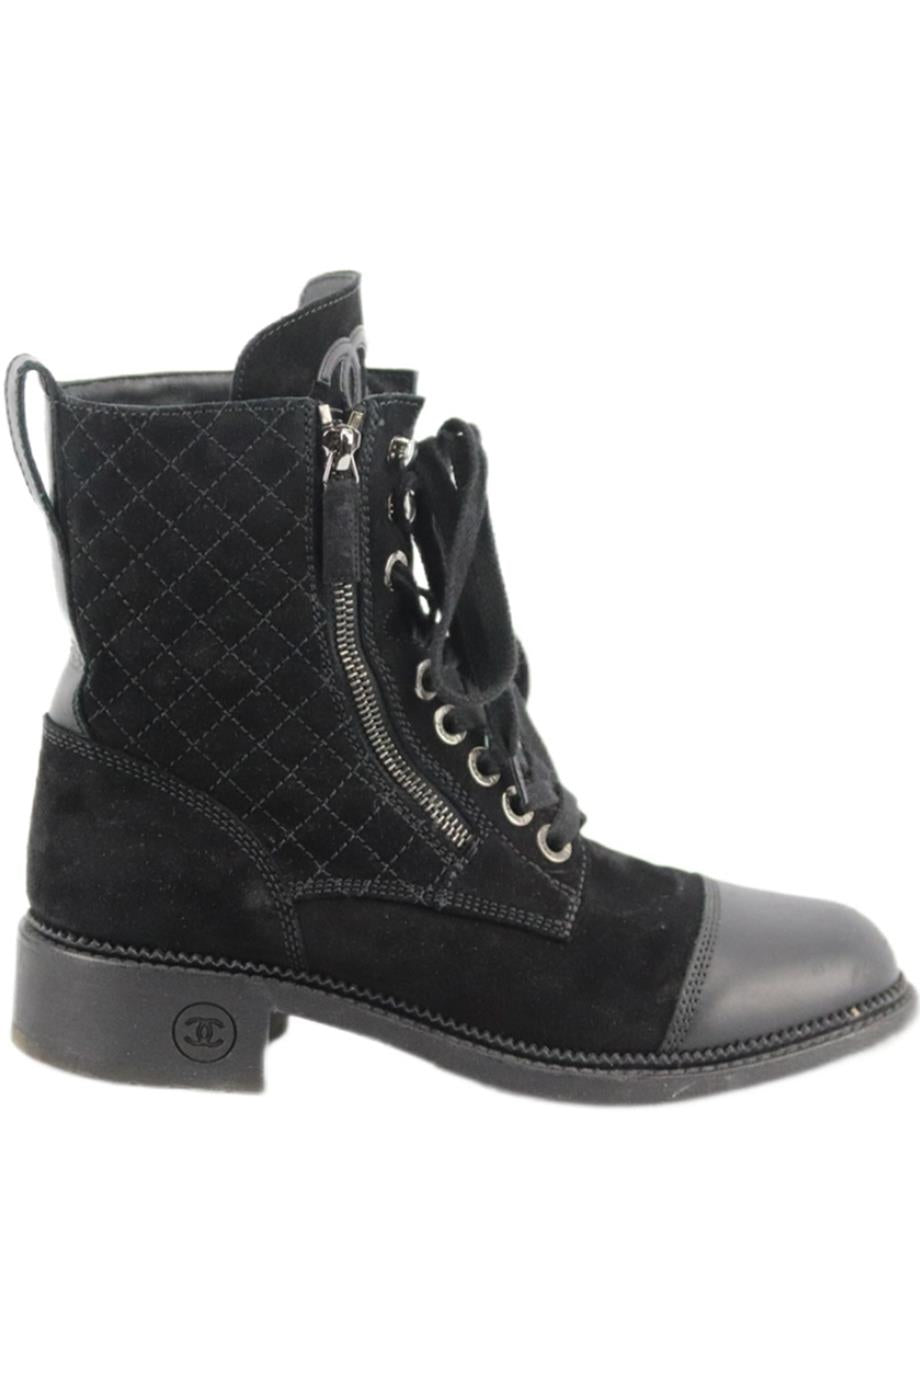 CHANEL CC DETAILED QUILTED SUEDE AND LEATHER COMBAT BOOTS EU 38.5